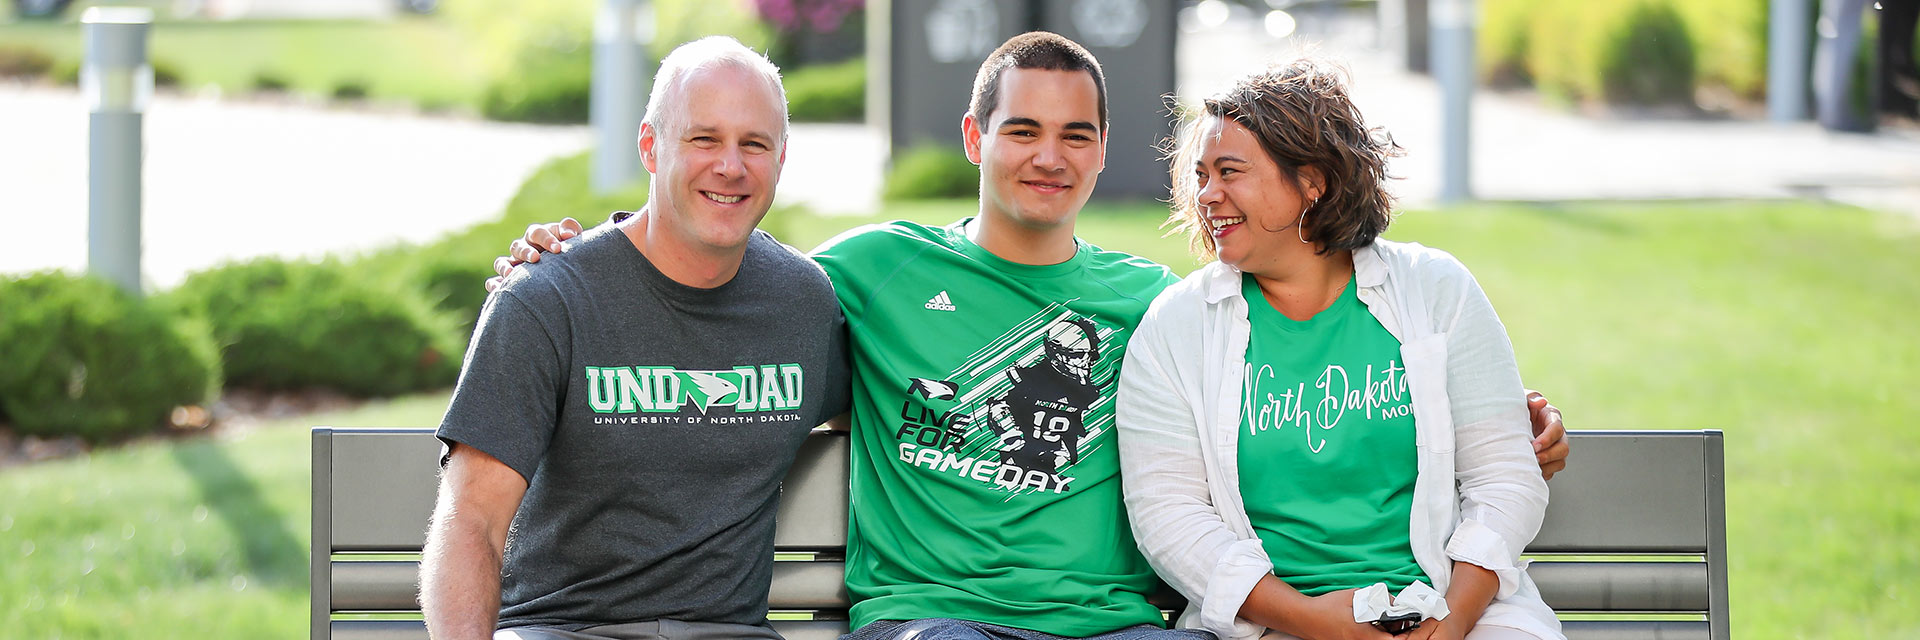 Family at UND